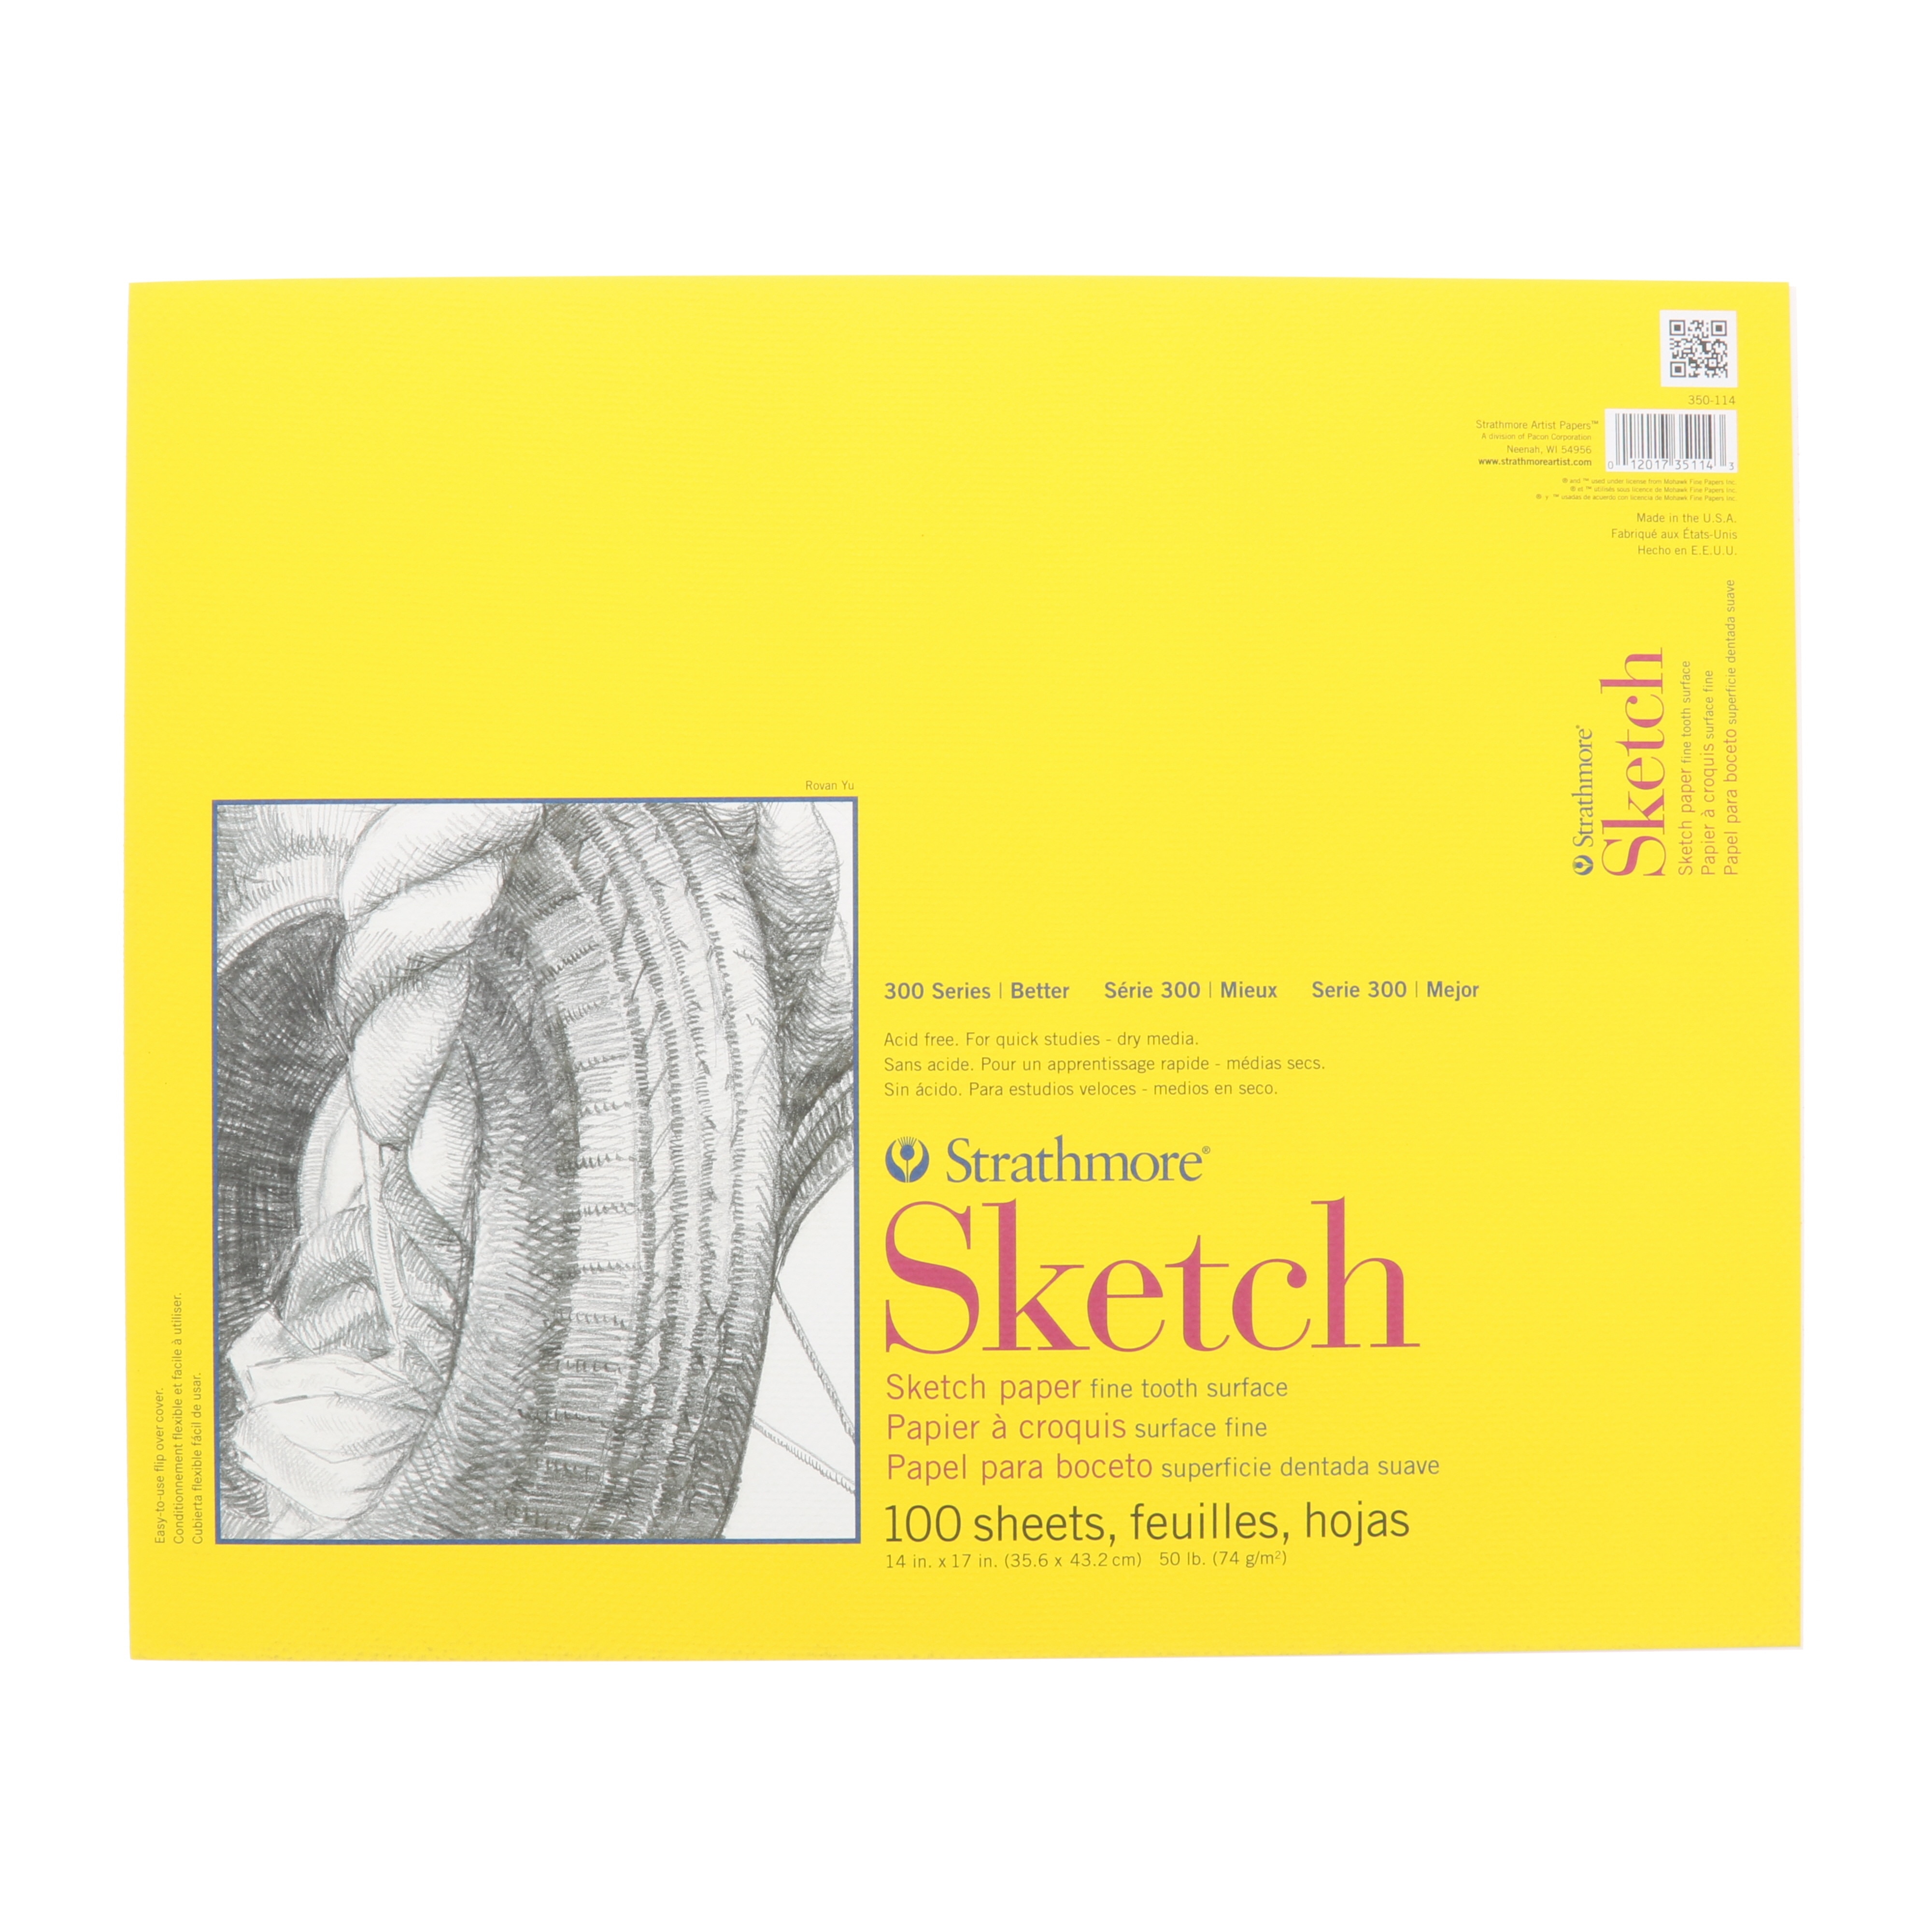 Strathmore Sketch Paper Pad, 300 Series, Tape-Bound, 14" x 17", 100 Sheets